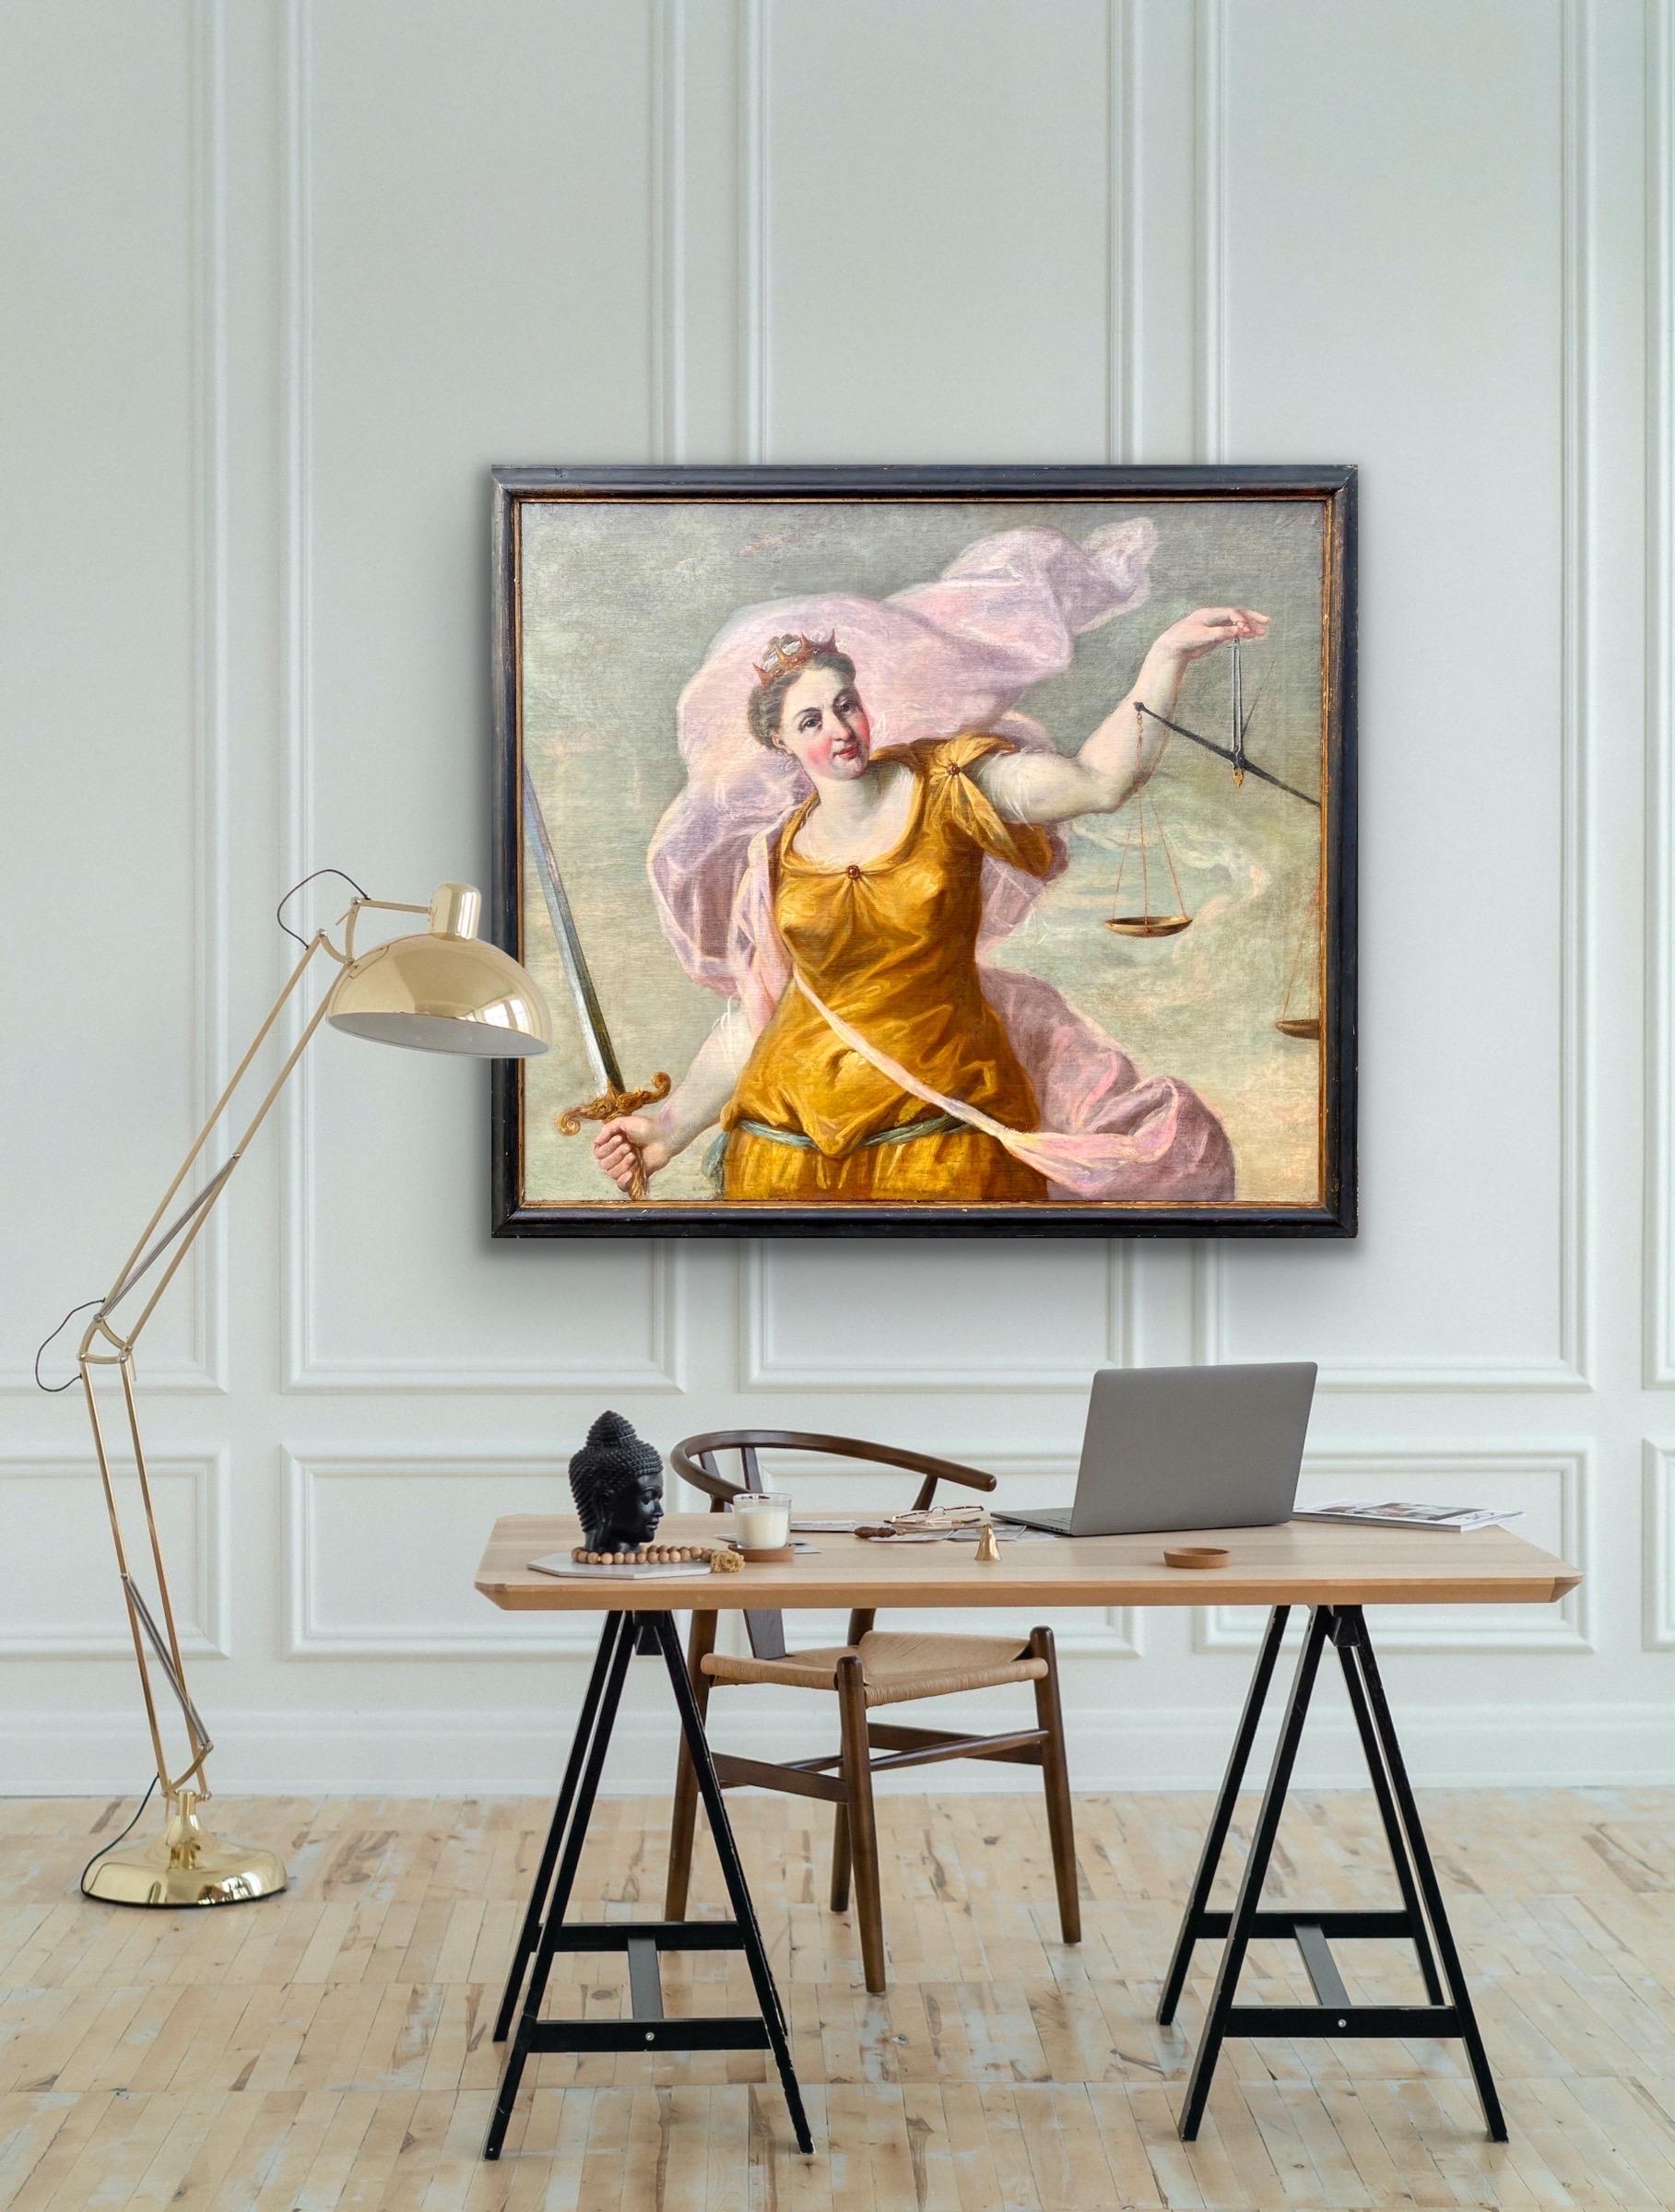 Huge 17th century Italian old master painting - Justitia - Lady Justice 7